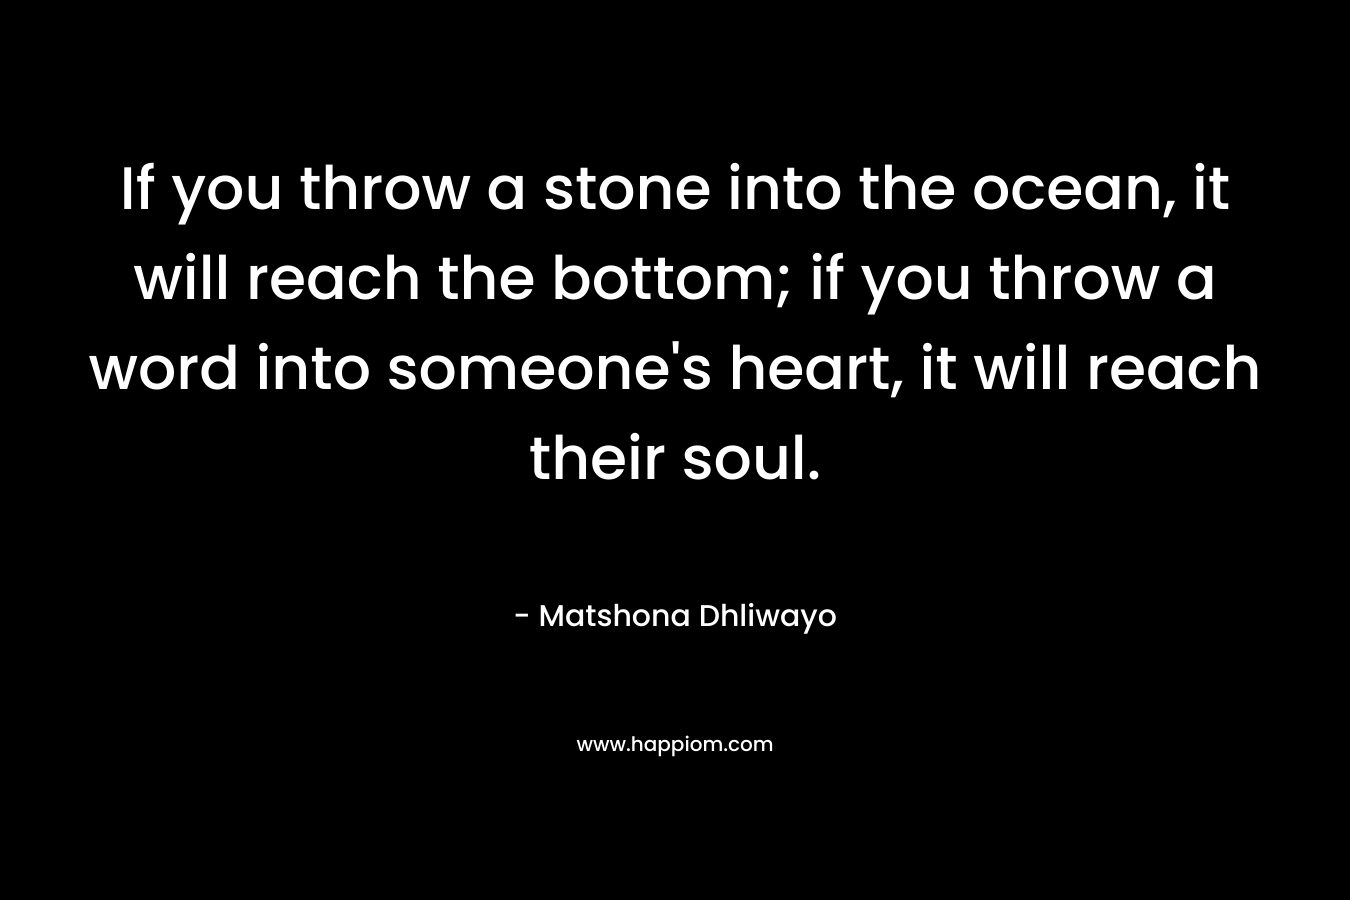 If you throw a stone into the ocean, it will reach the bottom; if you throw a word into someone's heart, it will reach their soul.